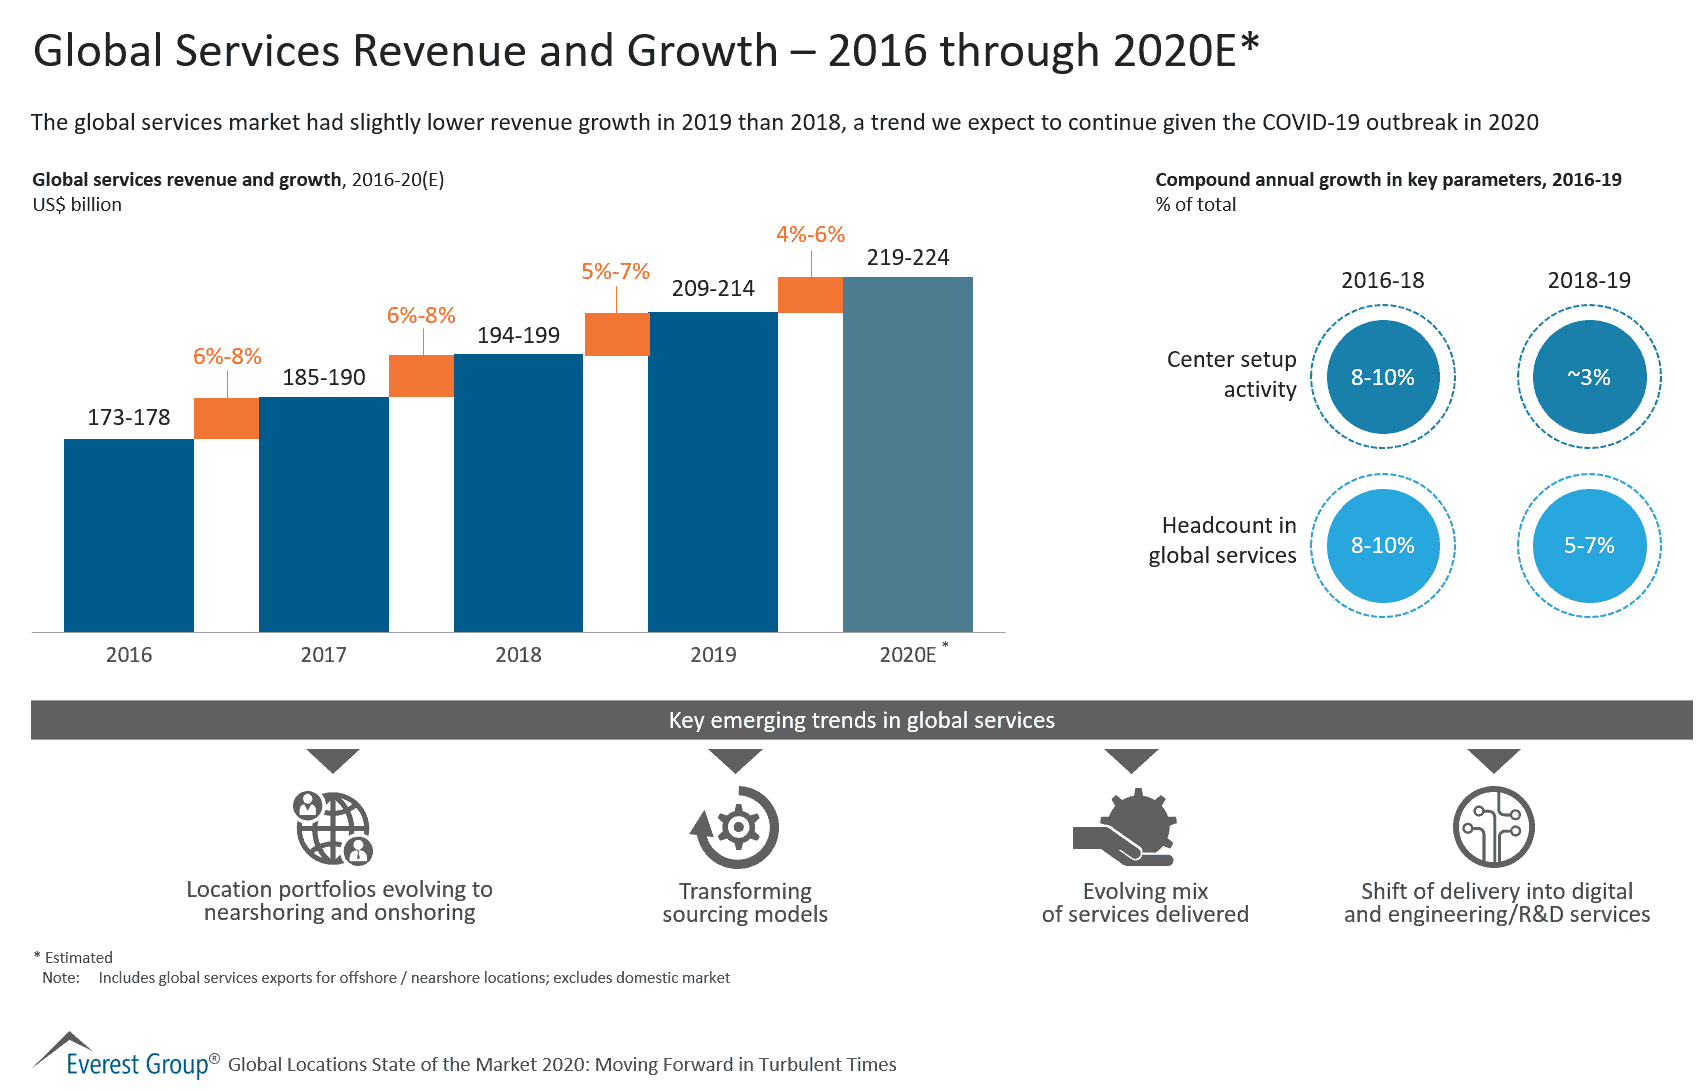 Global Services Revenue and Growth – 2016 through 2020E